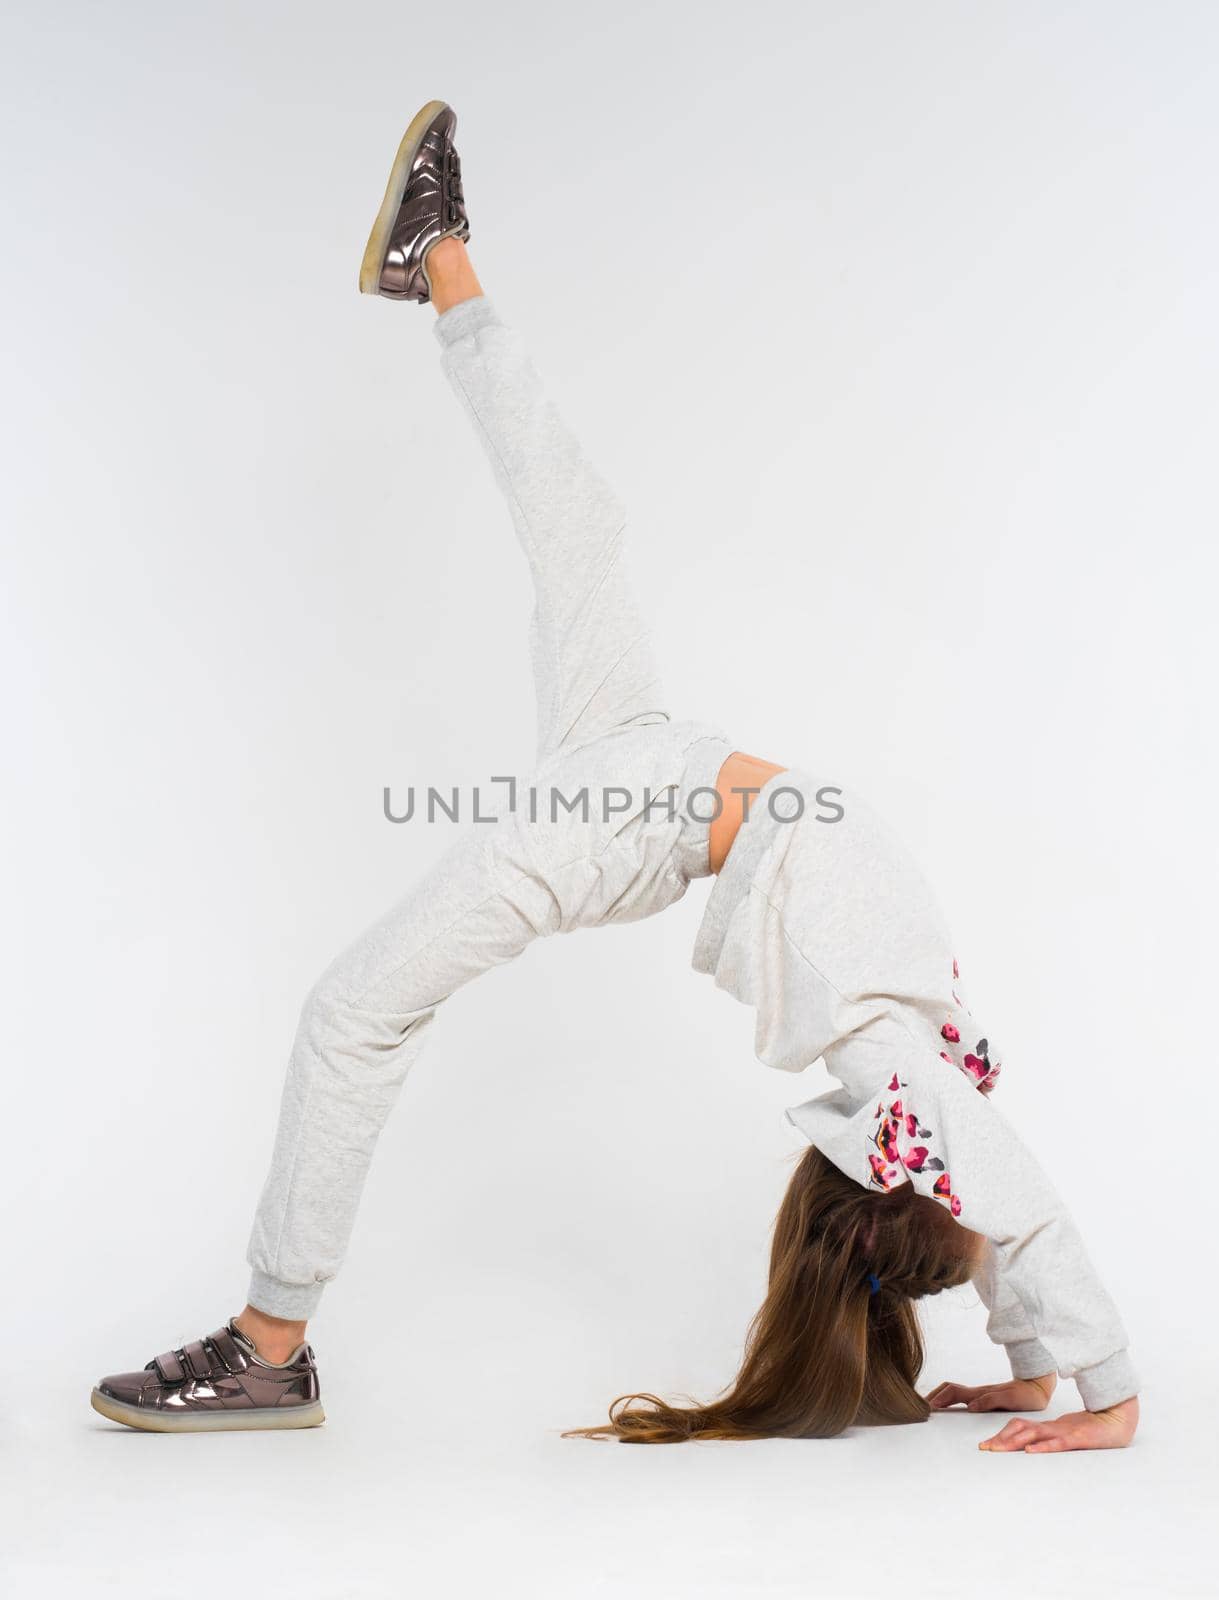 Young girl doing bridge position on the one leg support, one leg extended upwards